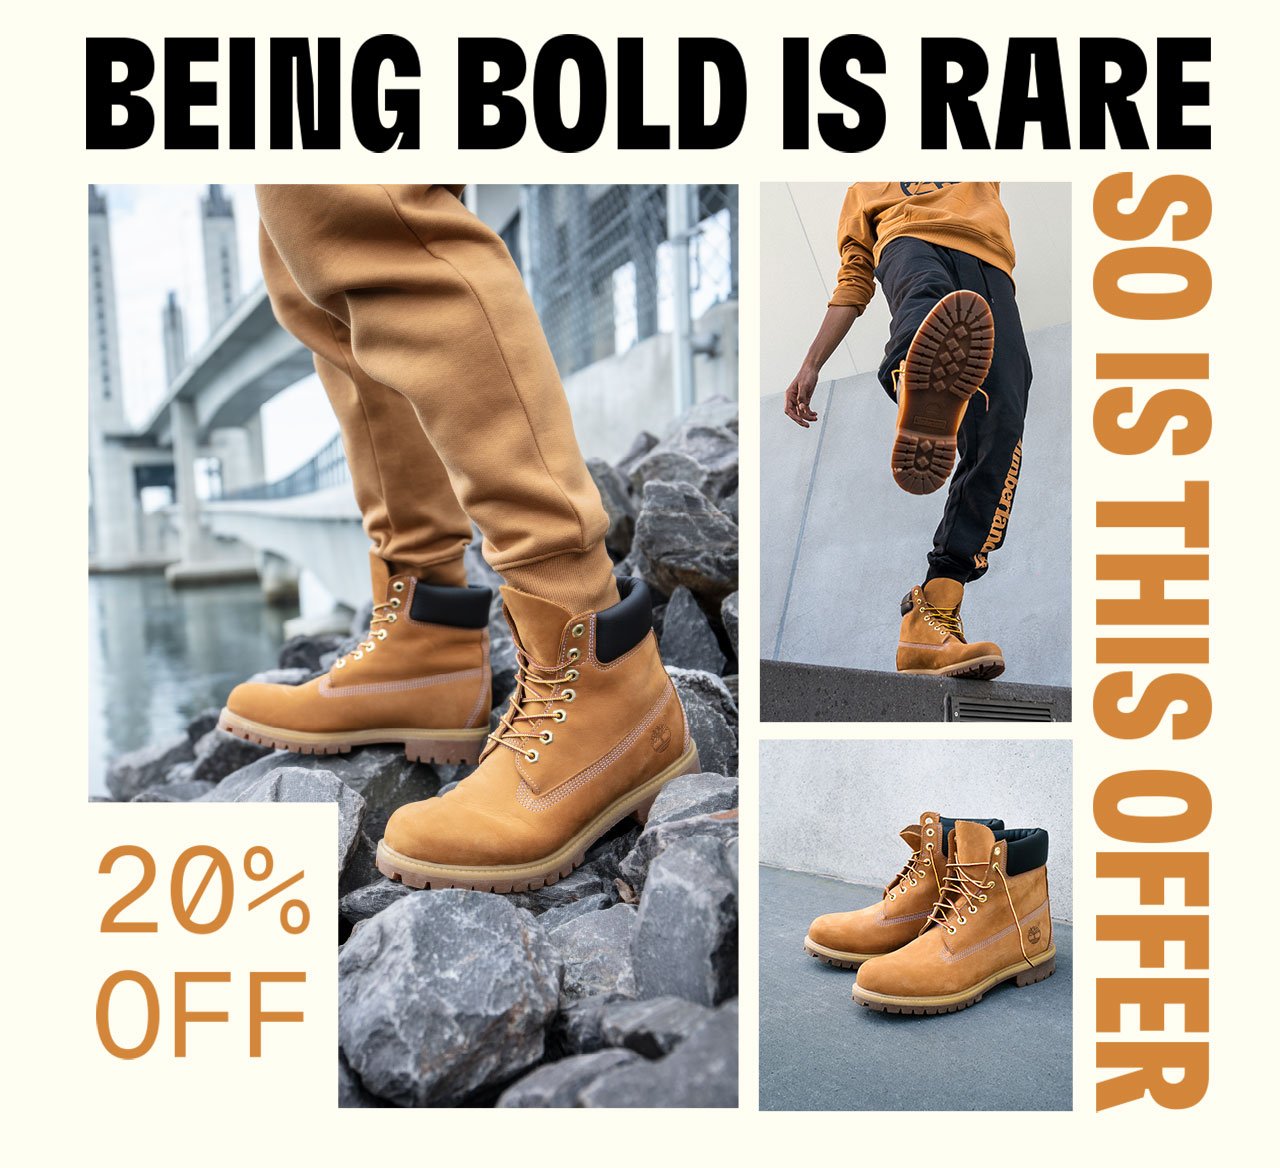 Being Bold Is Rare So Is This Offer 20% Off